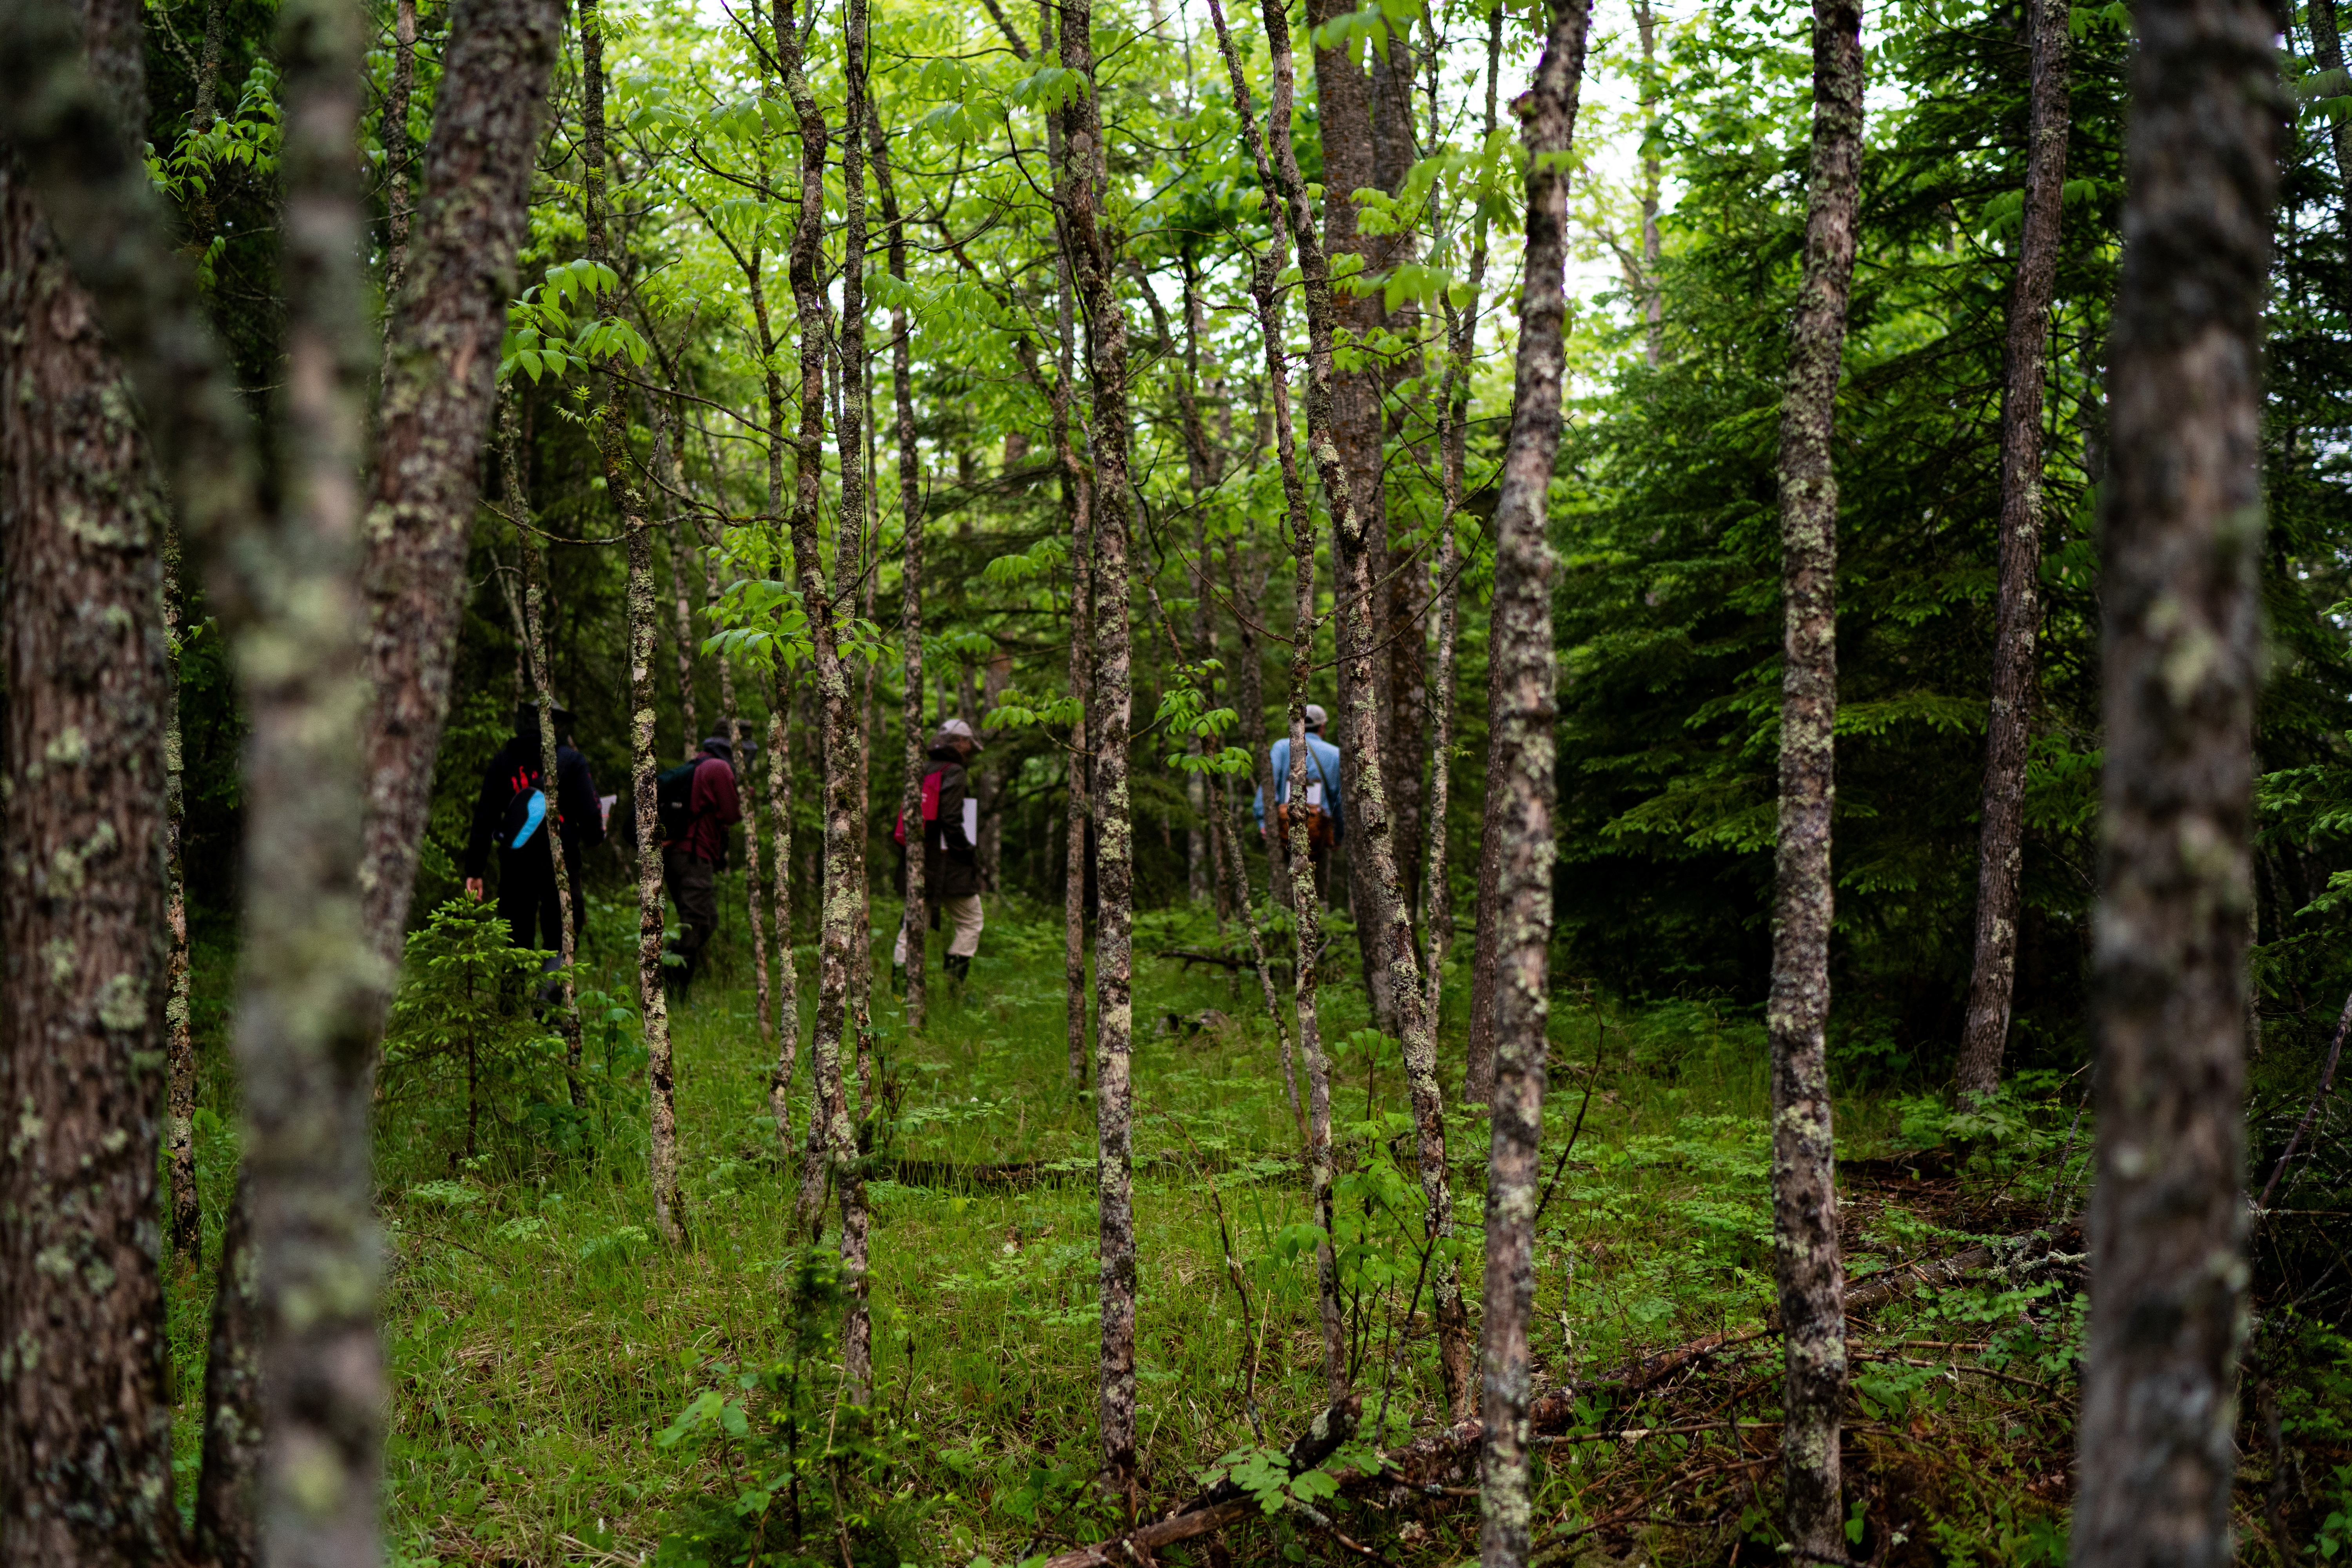 Instructor and three students walking through woods, with trees in the foreground